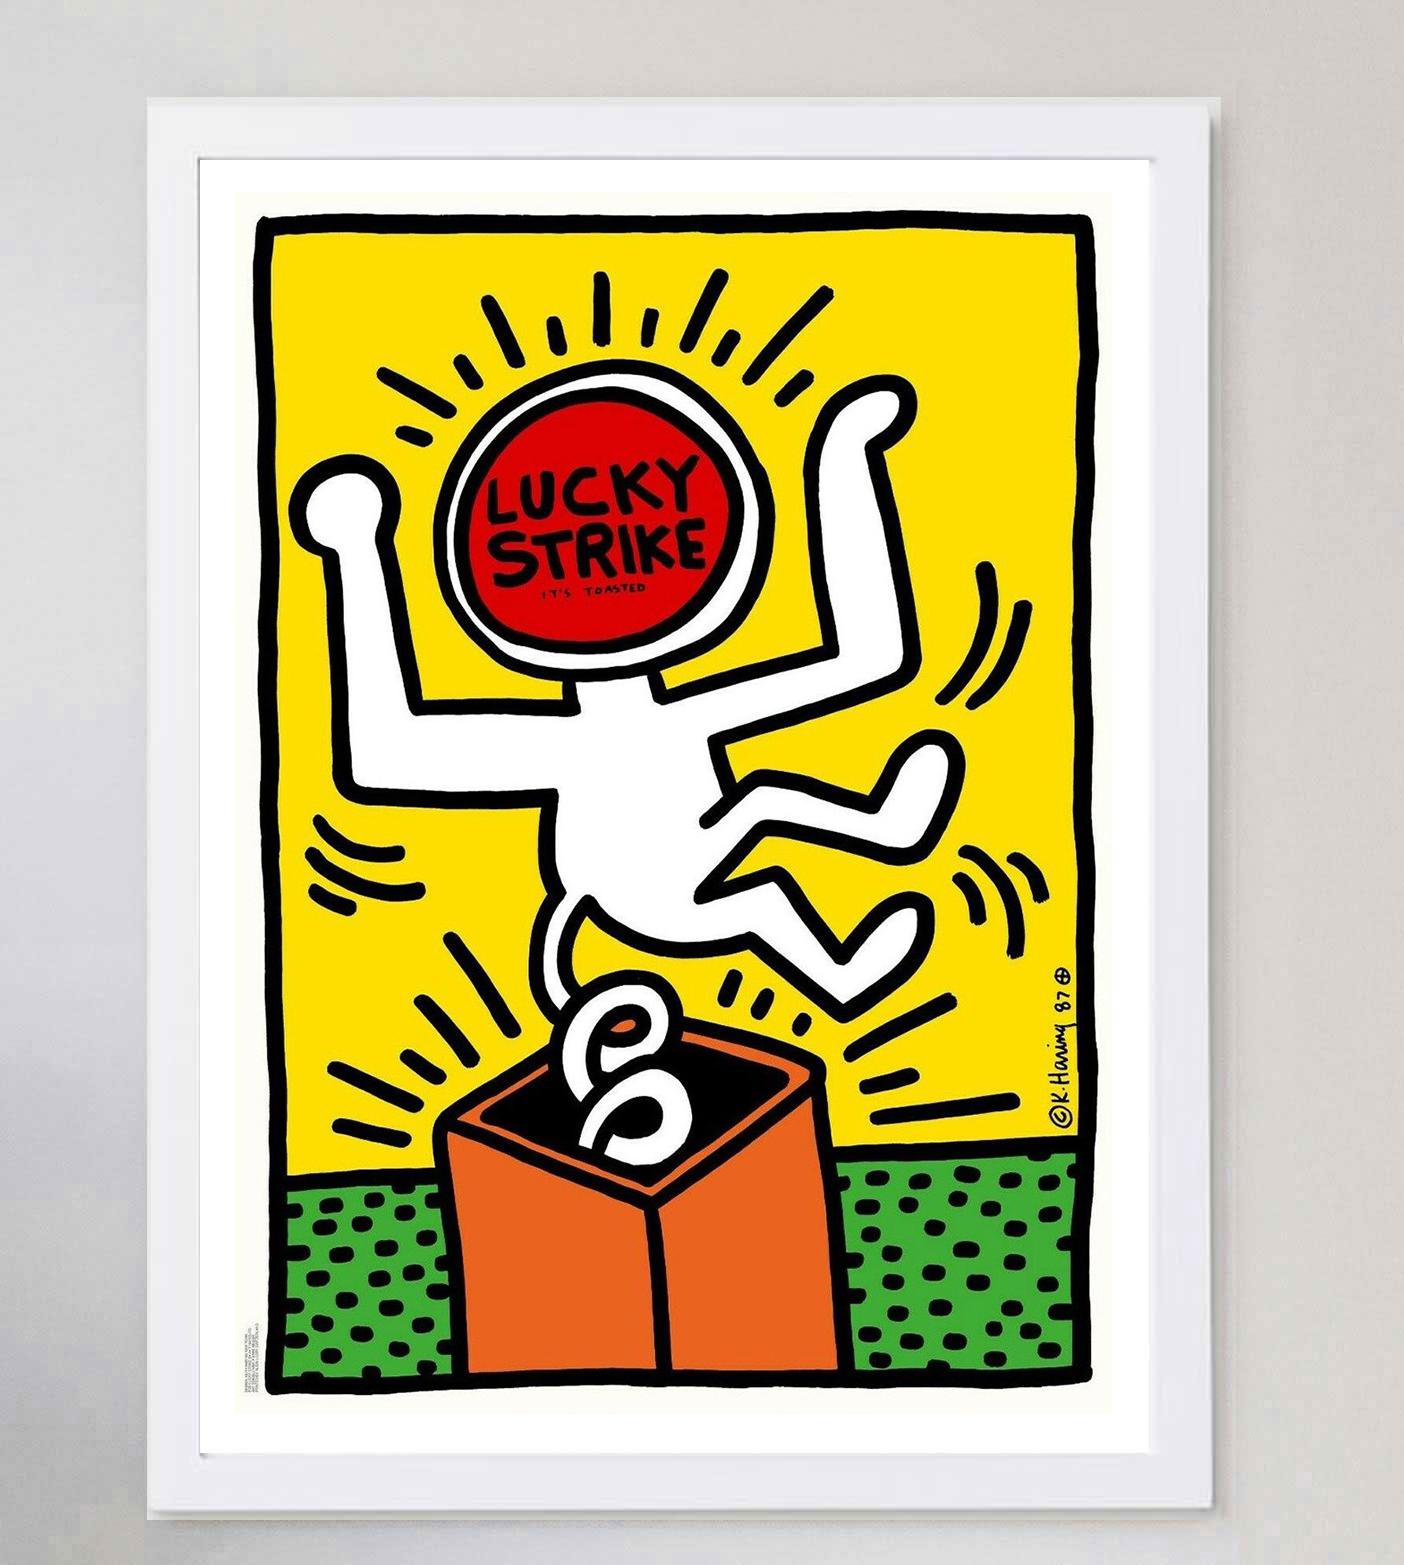 1987 Keith Haring Lucky Strike Set of Three Original Vintage Posters Excellent état - En vente à Winchester, GB